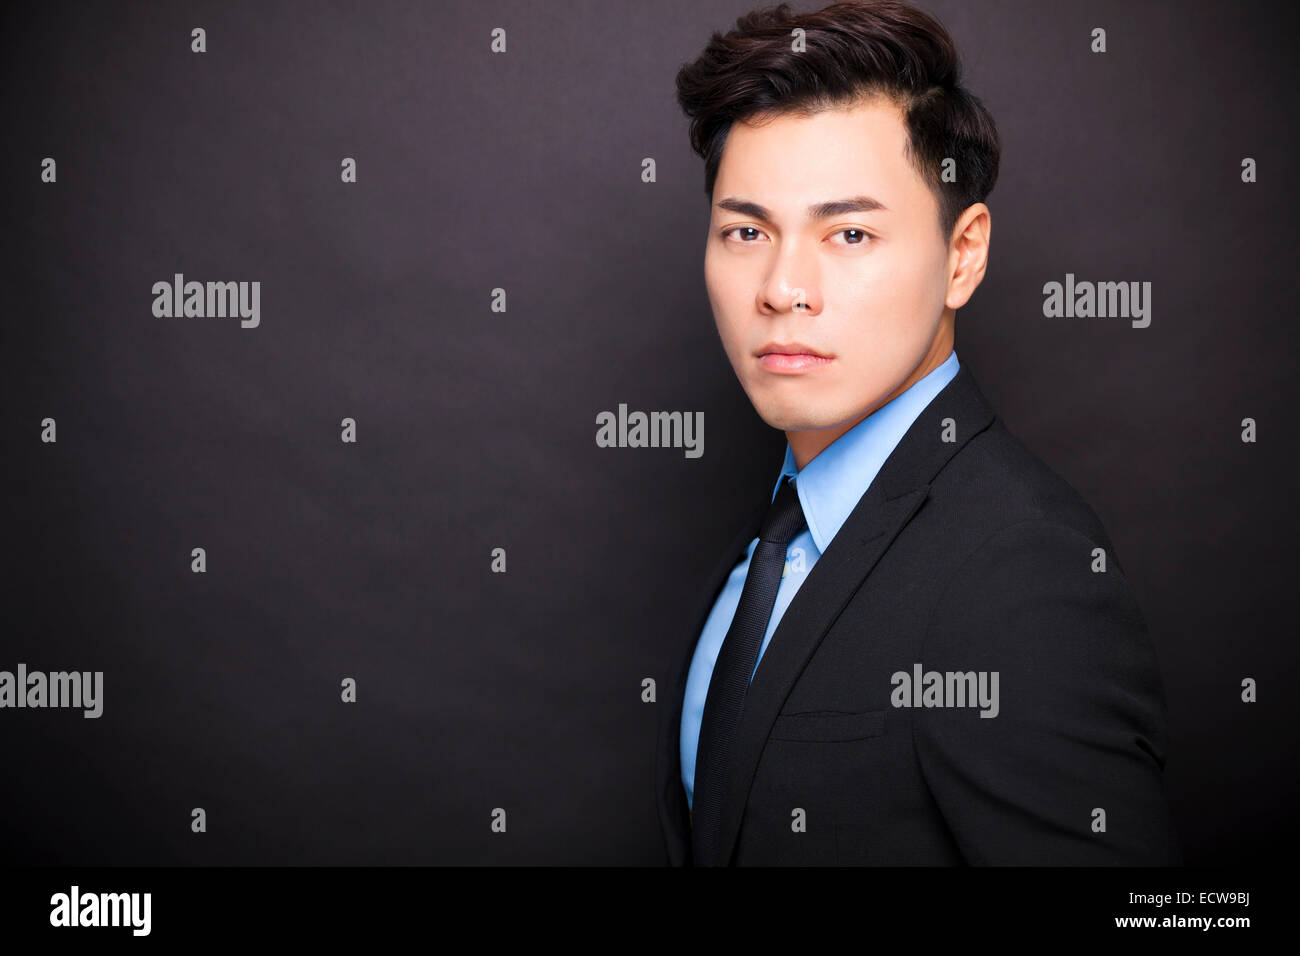 young businessman standing before black background Stock Photo